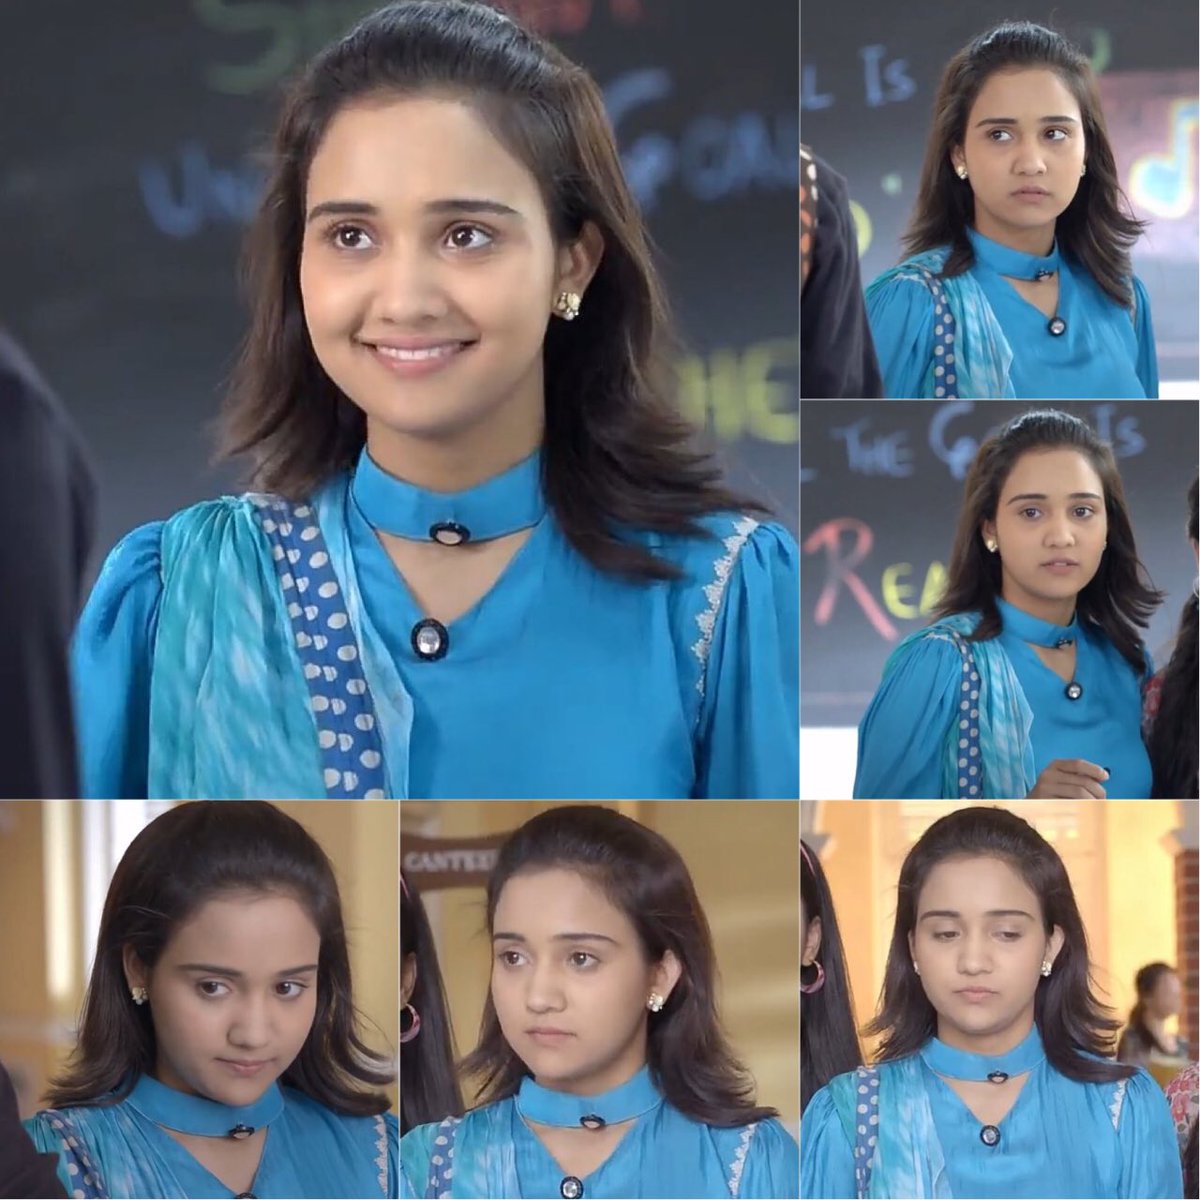 She looks so gorgeous in this dress
If you agree, click the heart button♥️
#YehUnDinoKiBaatHai 
#90sKiCollegeLife